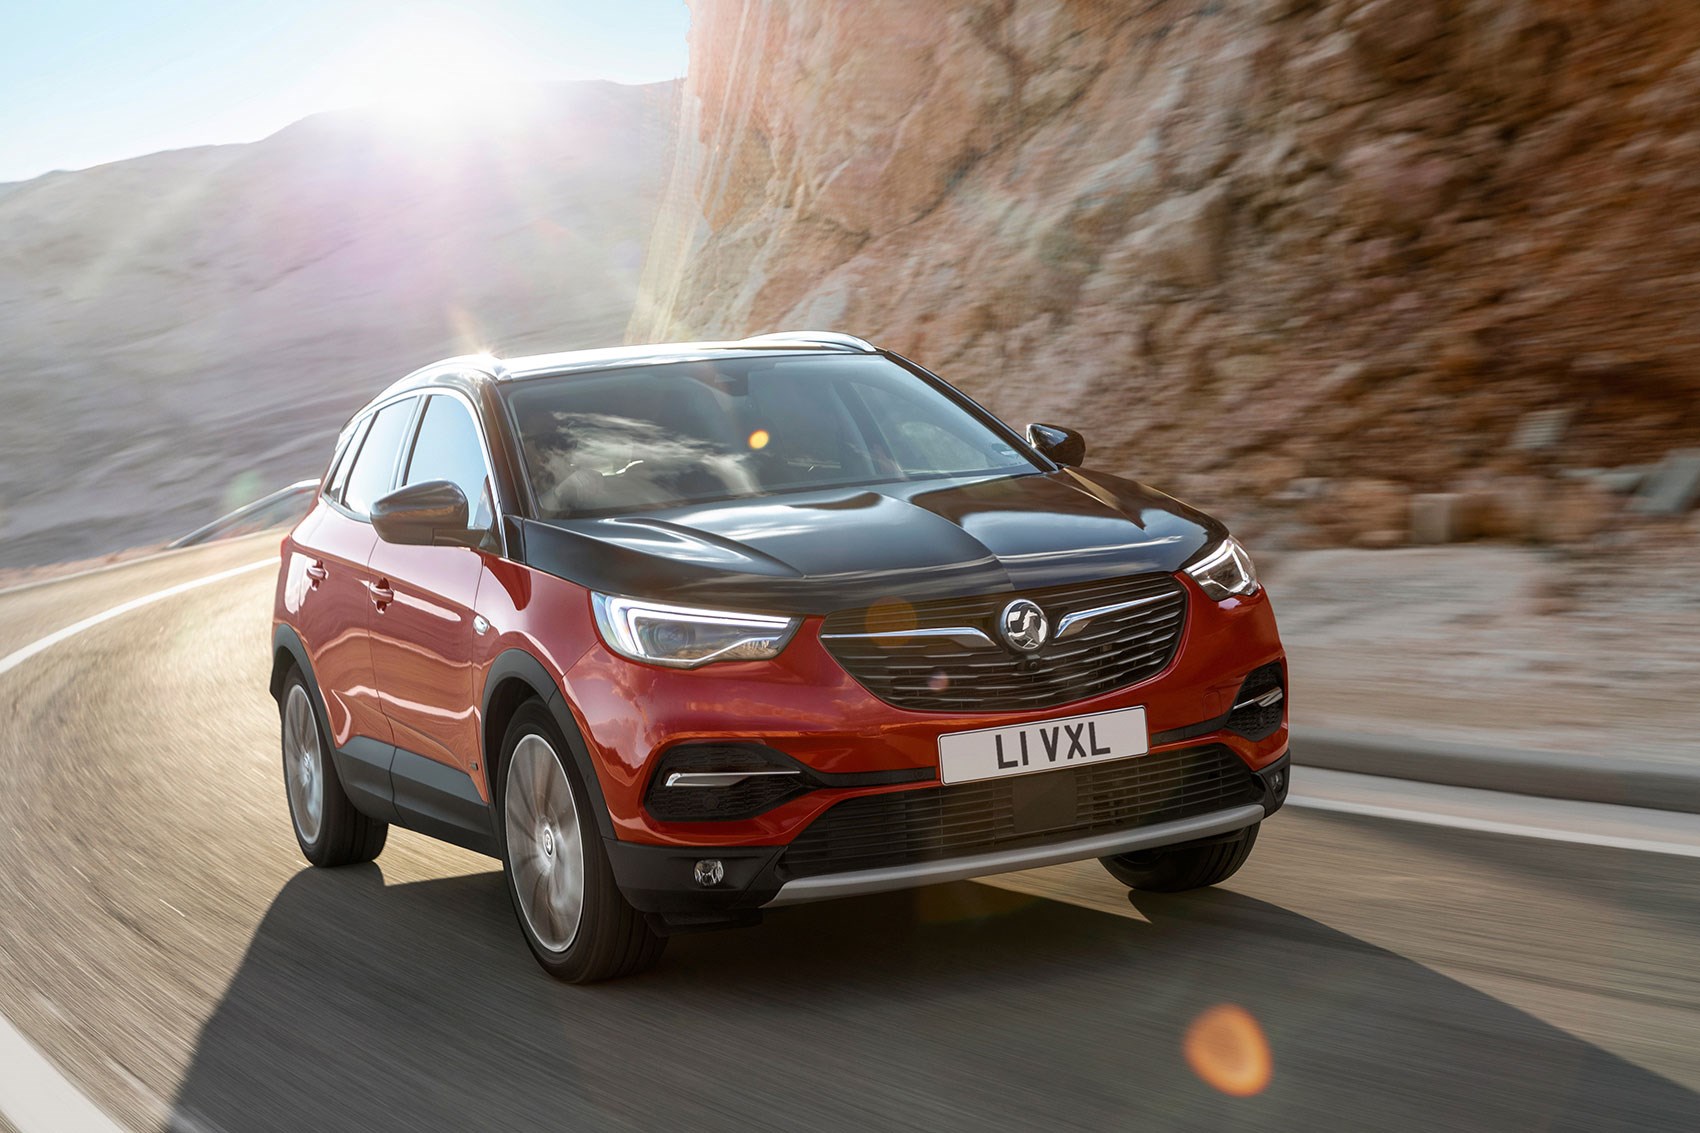 Vauxhall Grandland X Hybrid4 is Griffin's first plug-in